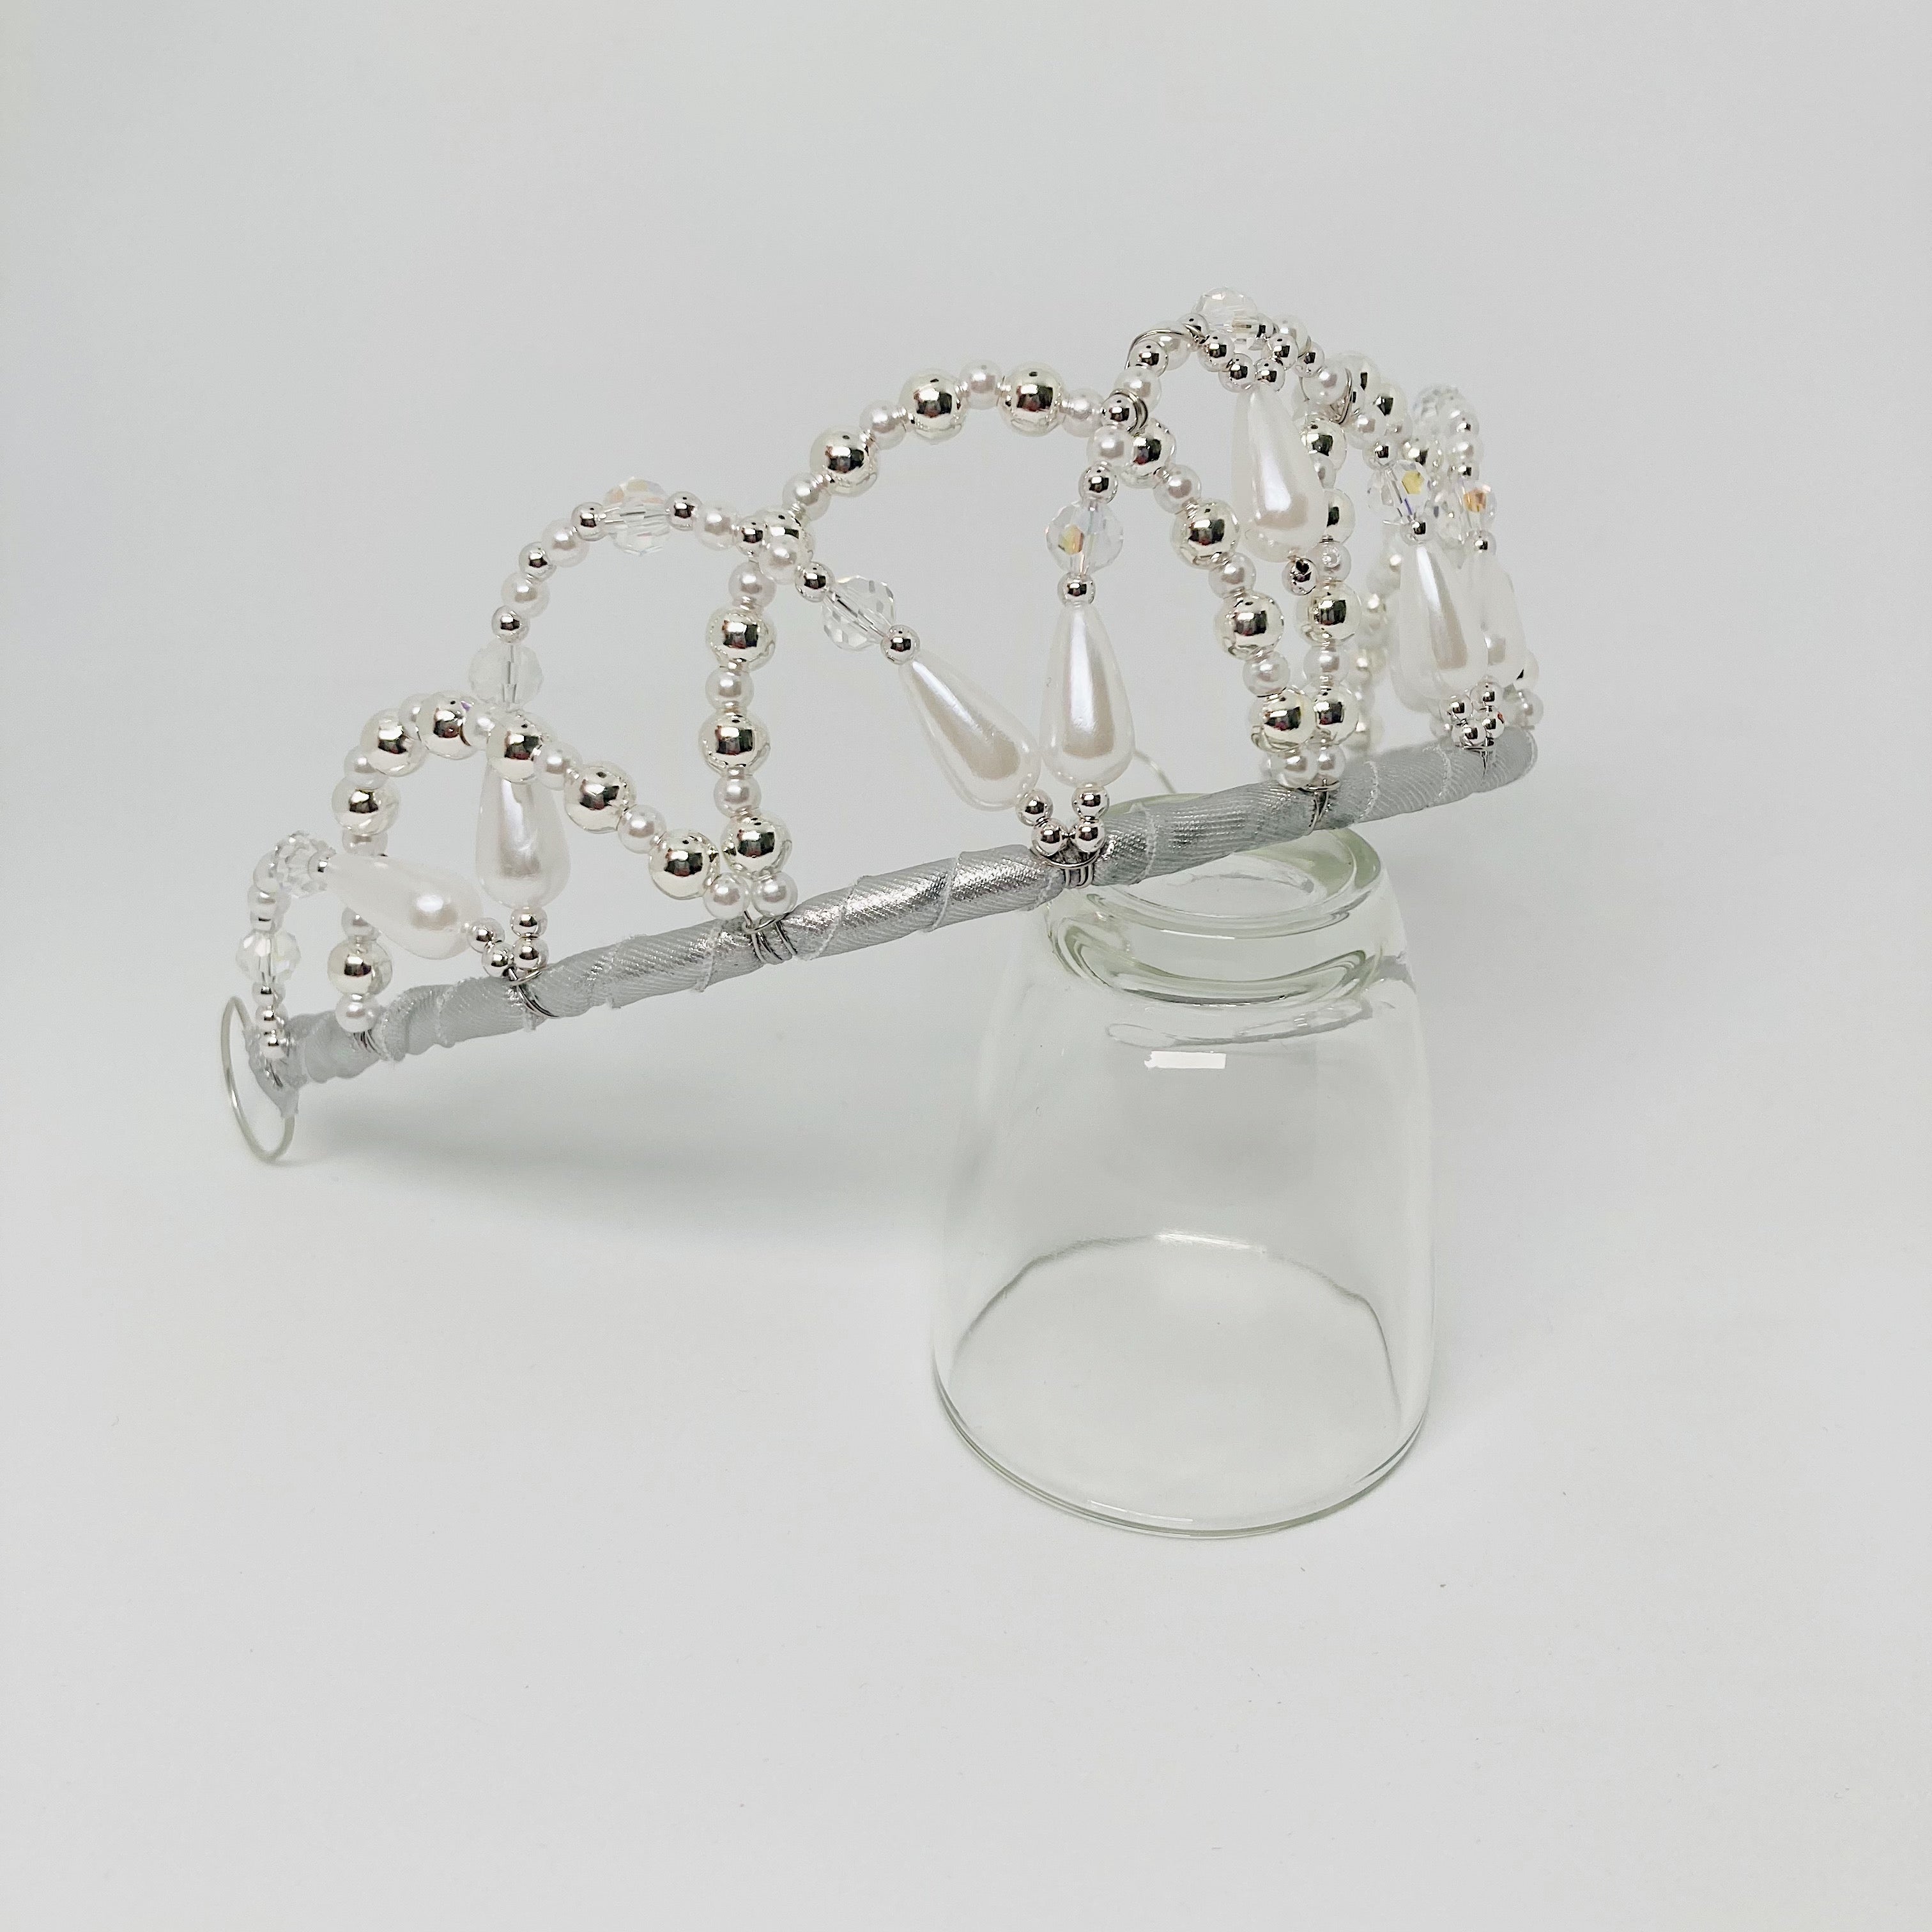 Side view of a tiara embellished with clear crystal, silver and frosted white beads.  The tiara is resting on a clear glass. 